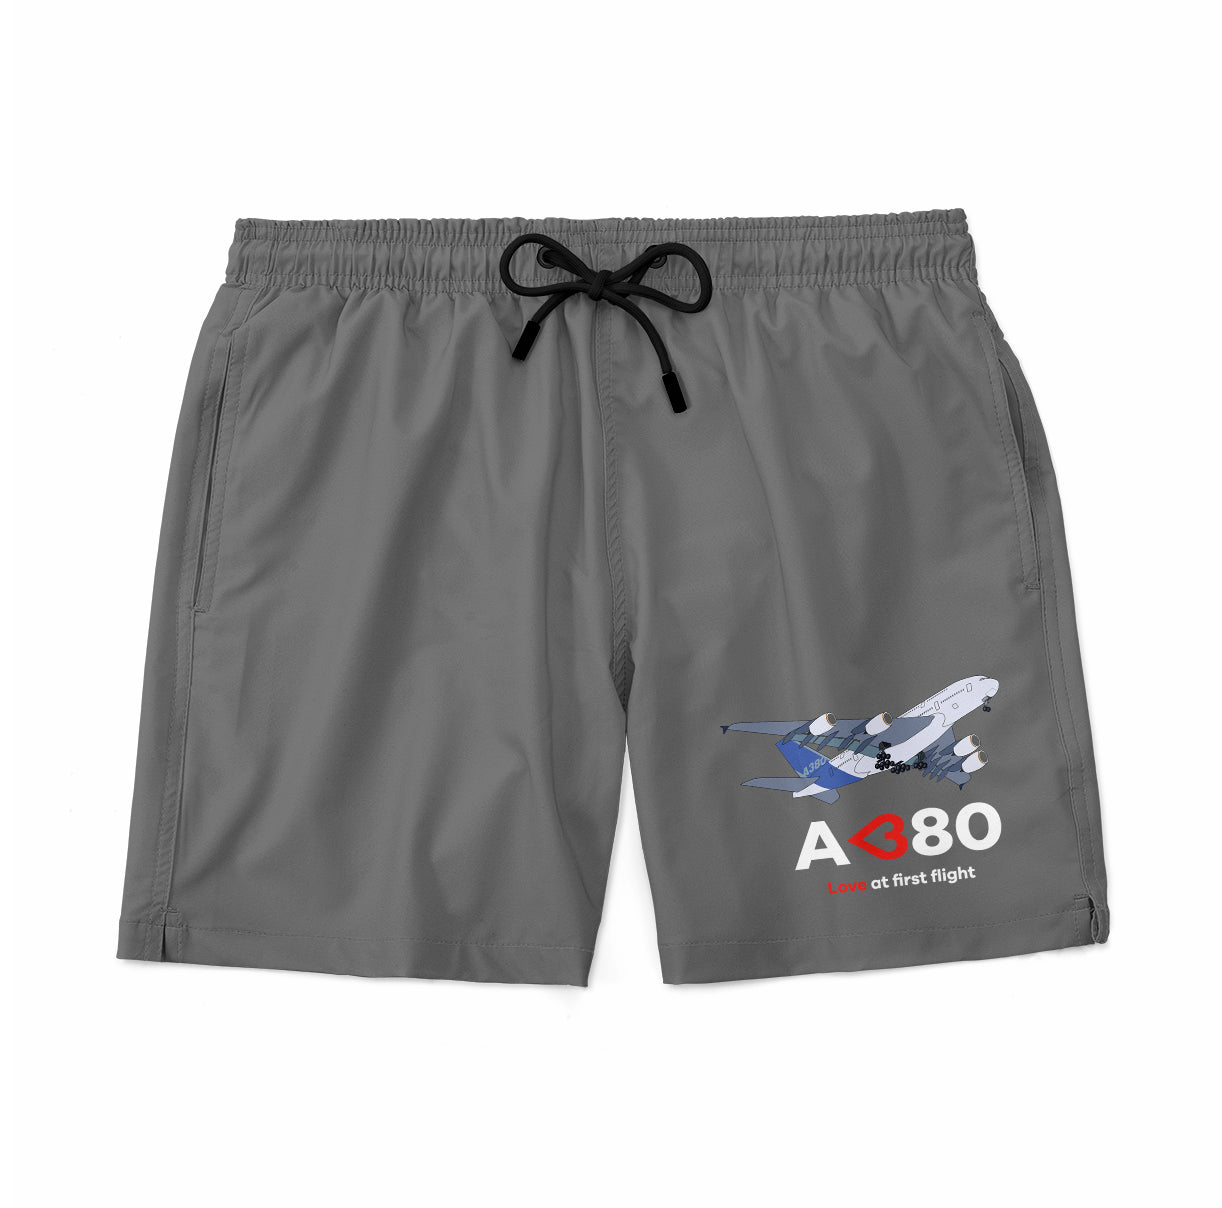 Airbus A380 Love at first flight Designed Swim Trunks & Shorts